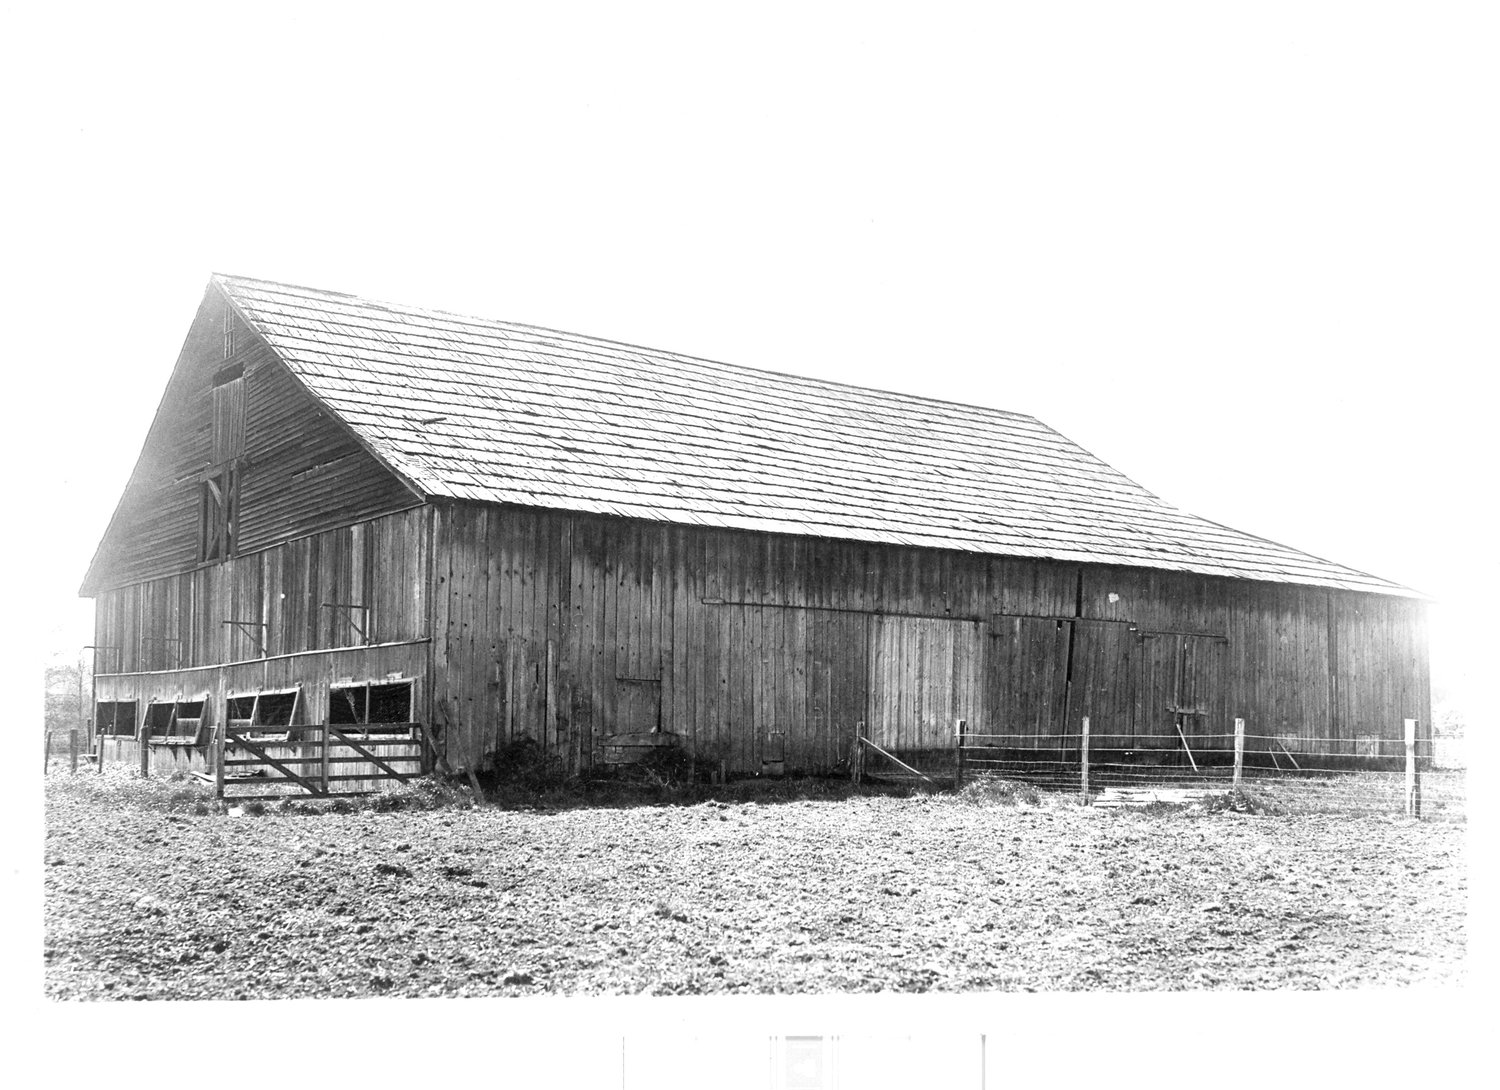 The intact Borst barn is pictured.